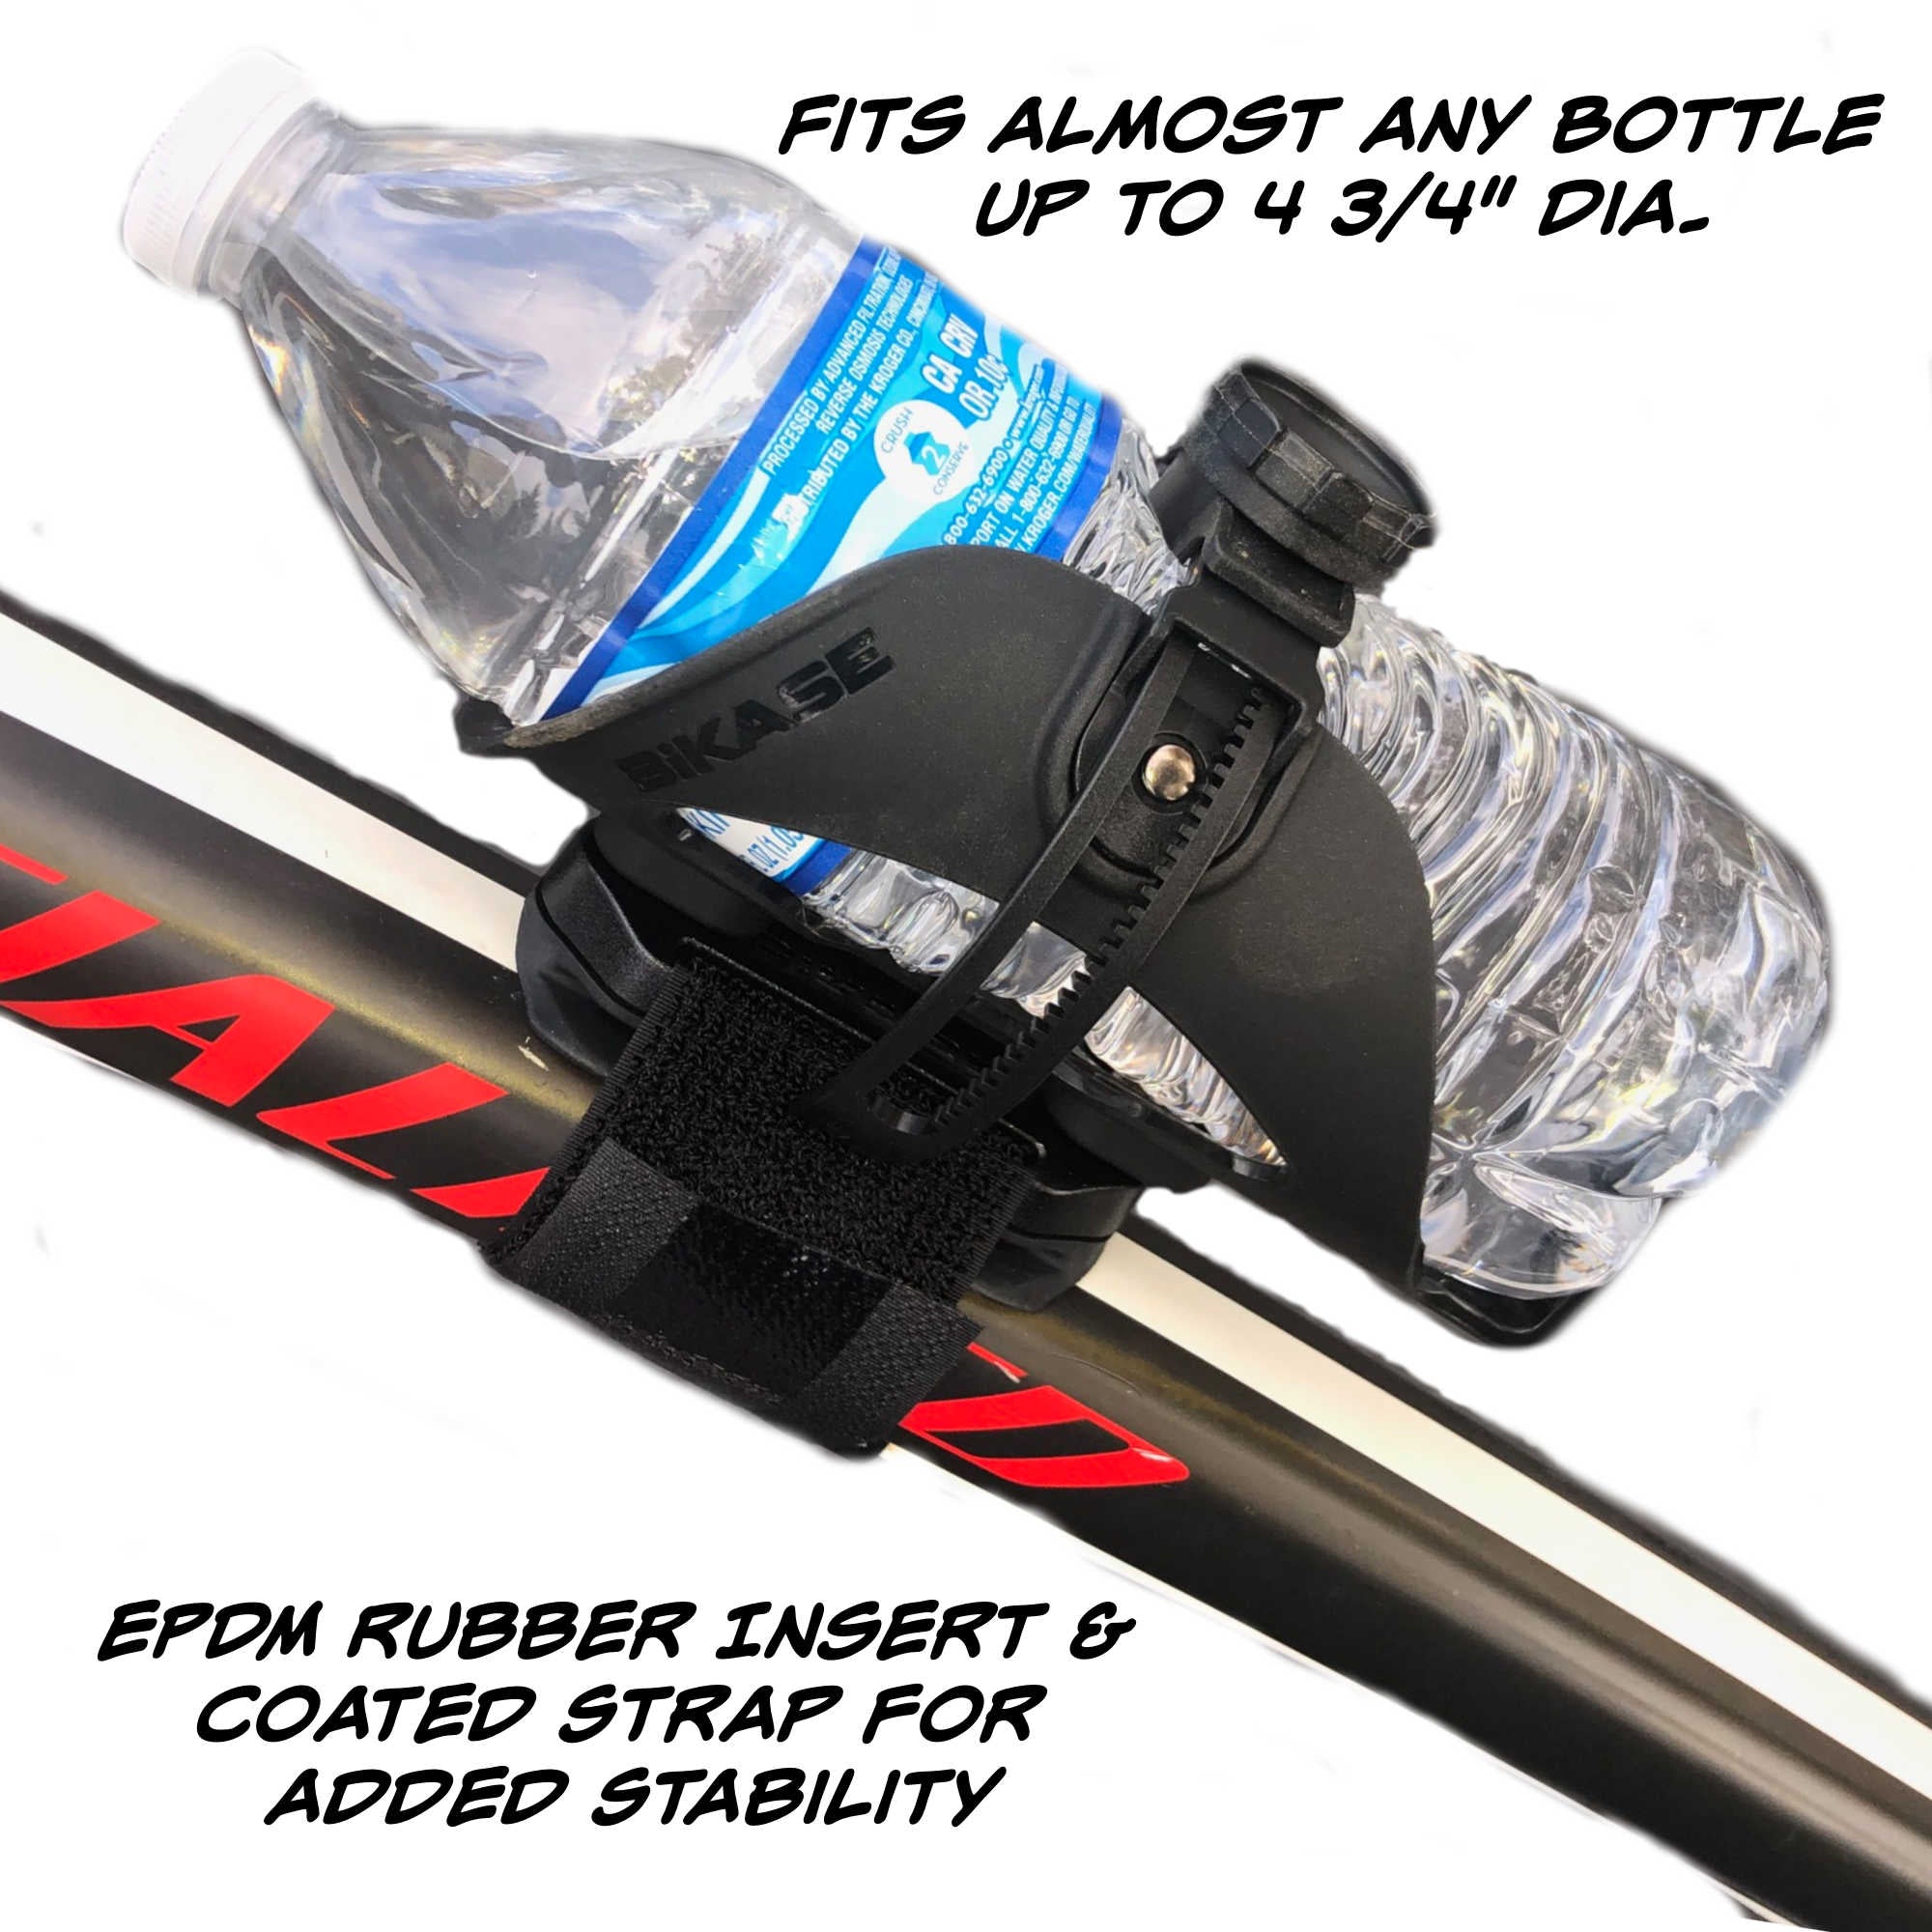 Water Bottle Holder for Bikes , ABC Cage - Any Bottle Cage, Adjustable Water Bottle Cage for Bicycles by AltGear LLC.